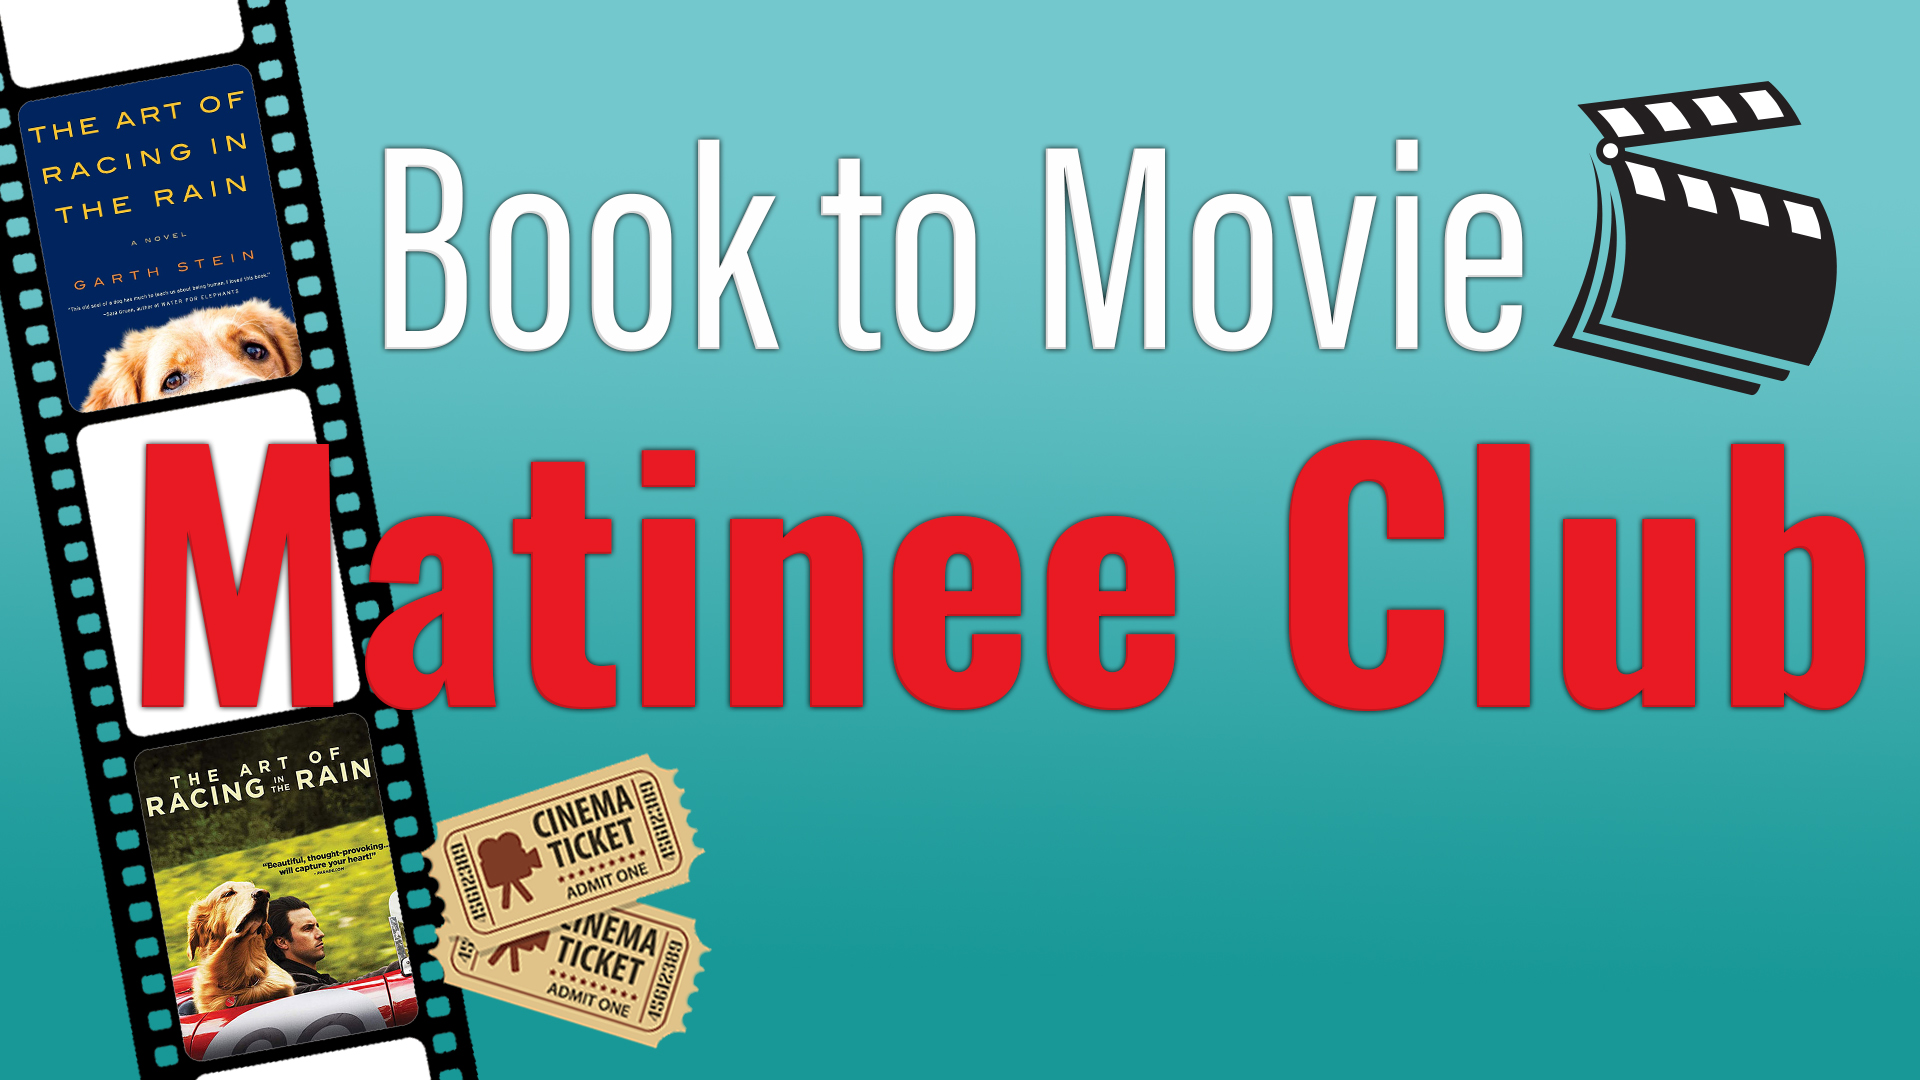 Image reads " Book to Movie Matinee Club" on a blue gradient background. There is a film strip to the left of the words and inside the film strip are the book cover for "The Art of Racing in the Rain" by Garth Stein and the movie poster for "The Art of Racing in the Rain". .